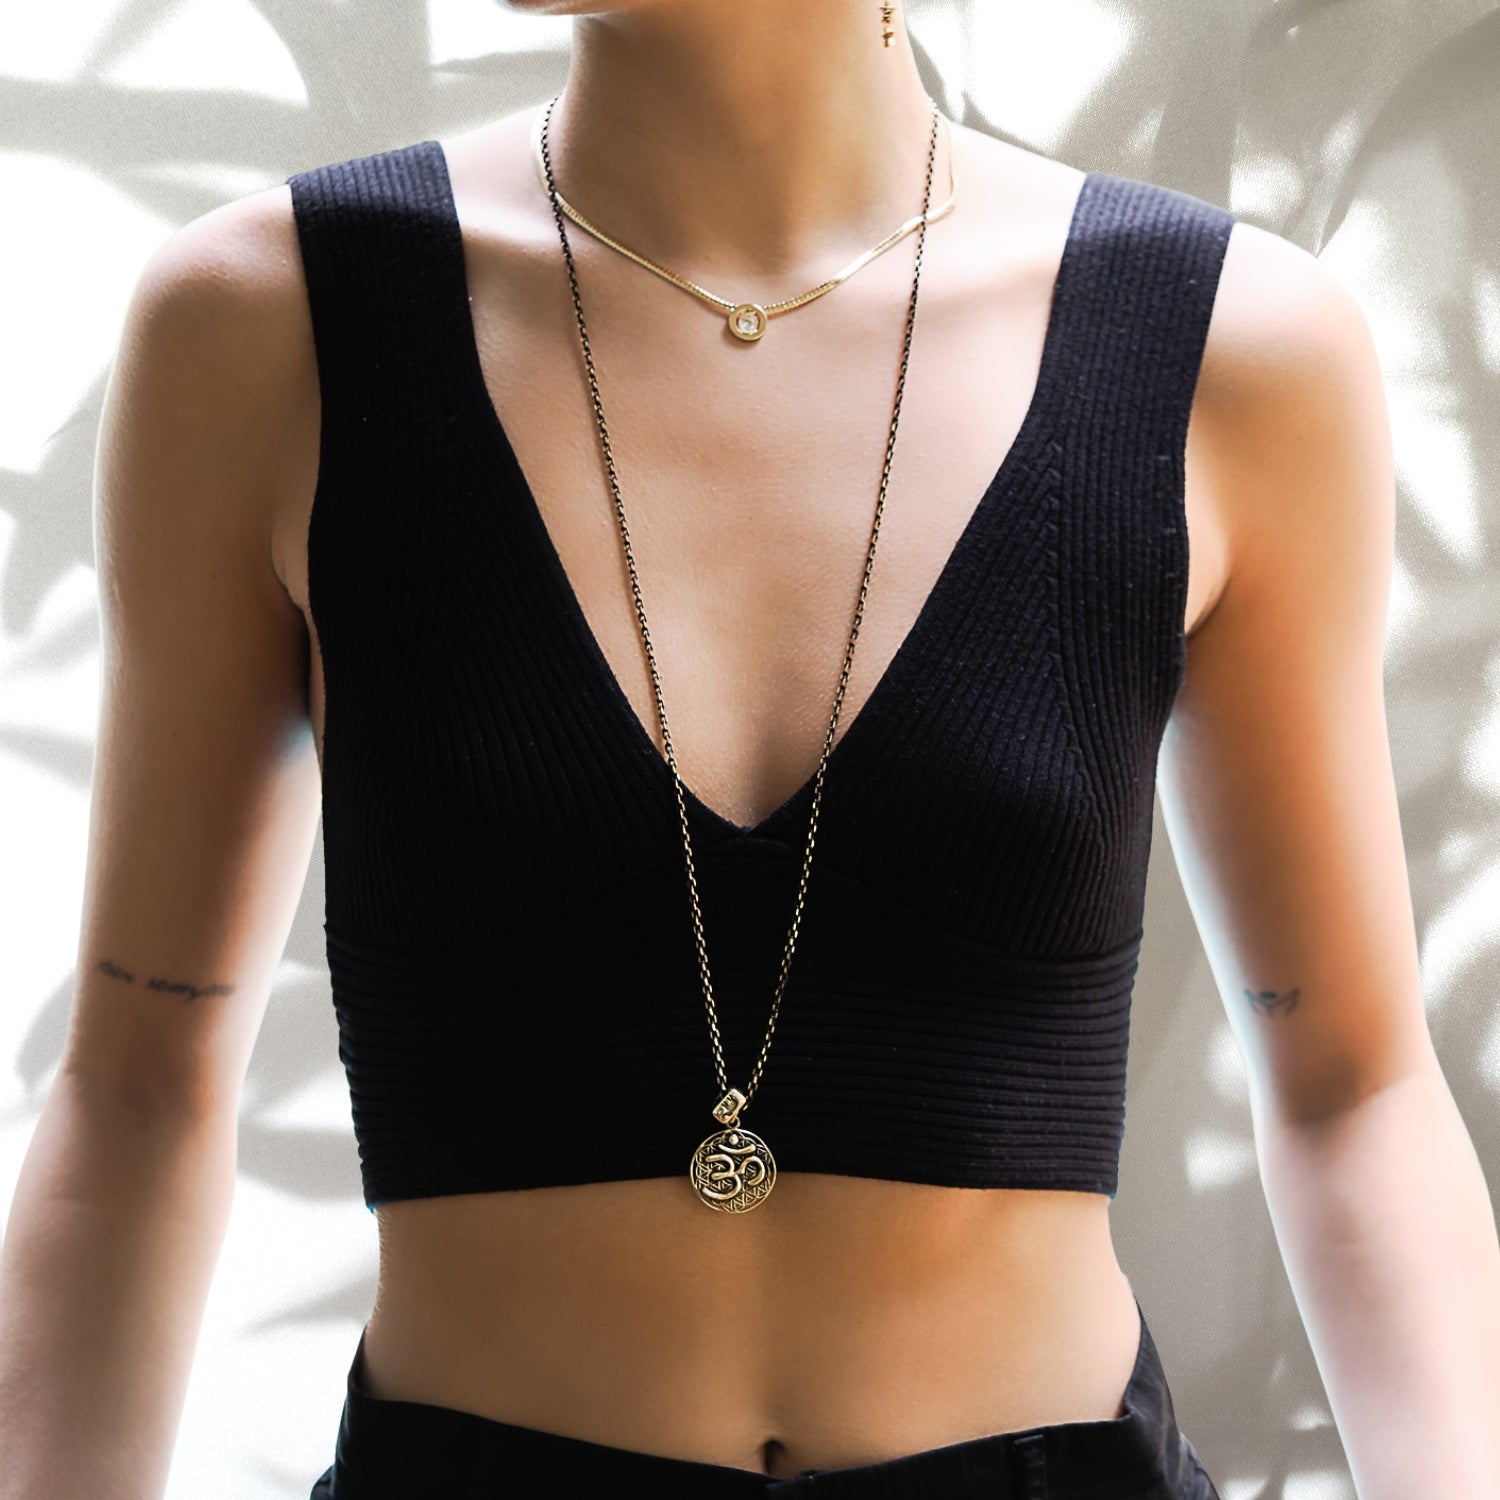 A model wearing the Spiritual Symbols Om Necklace, radiating a sense of spirituality and inner peace.